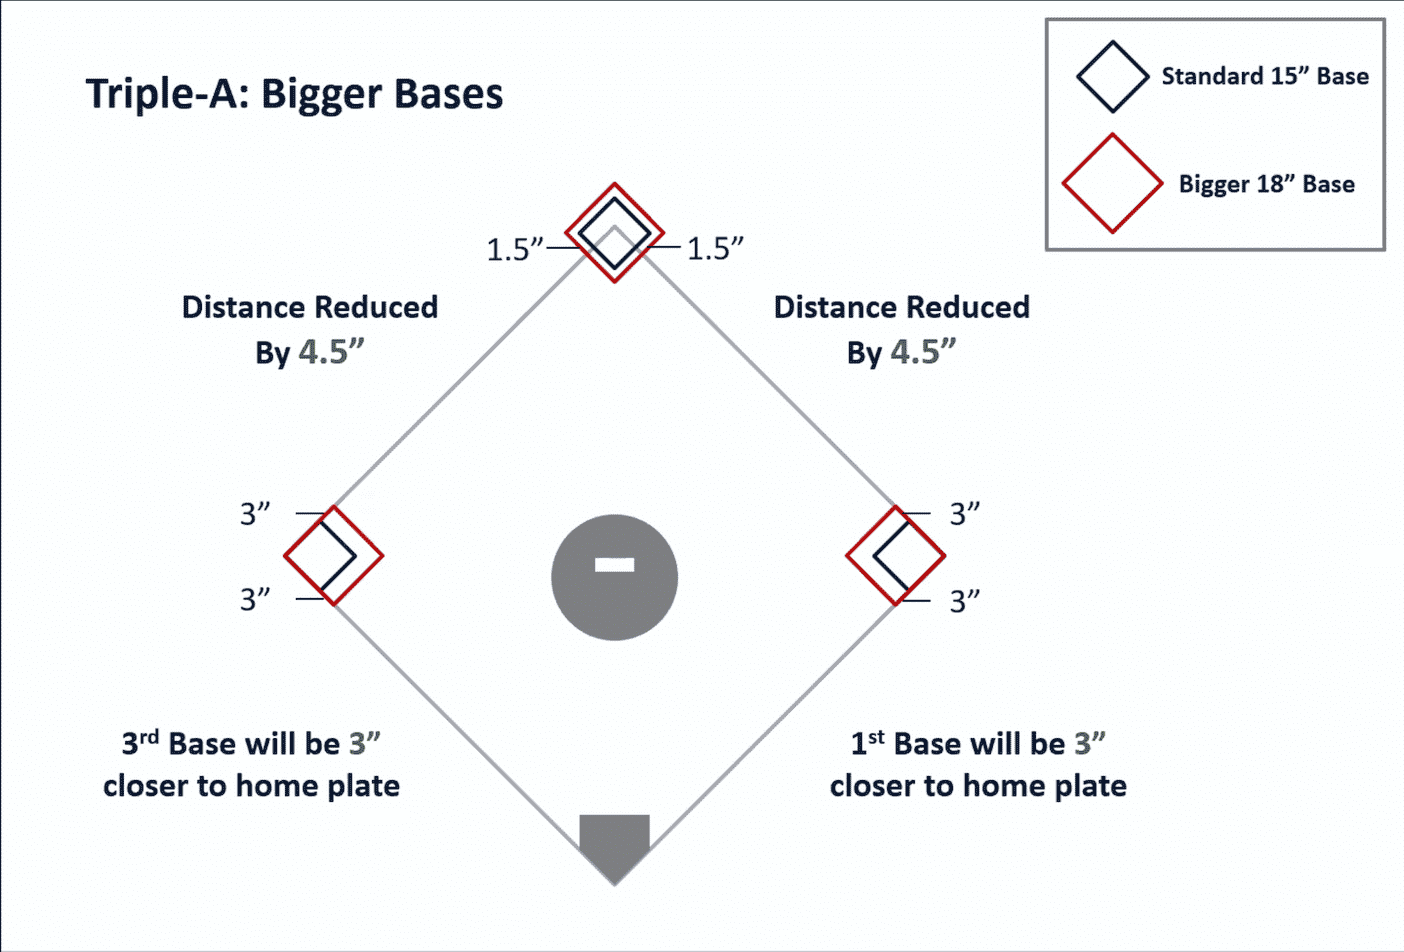 MLB: Bigger bases photos show how large new bases are compared to old